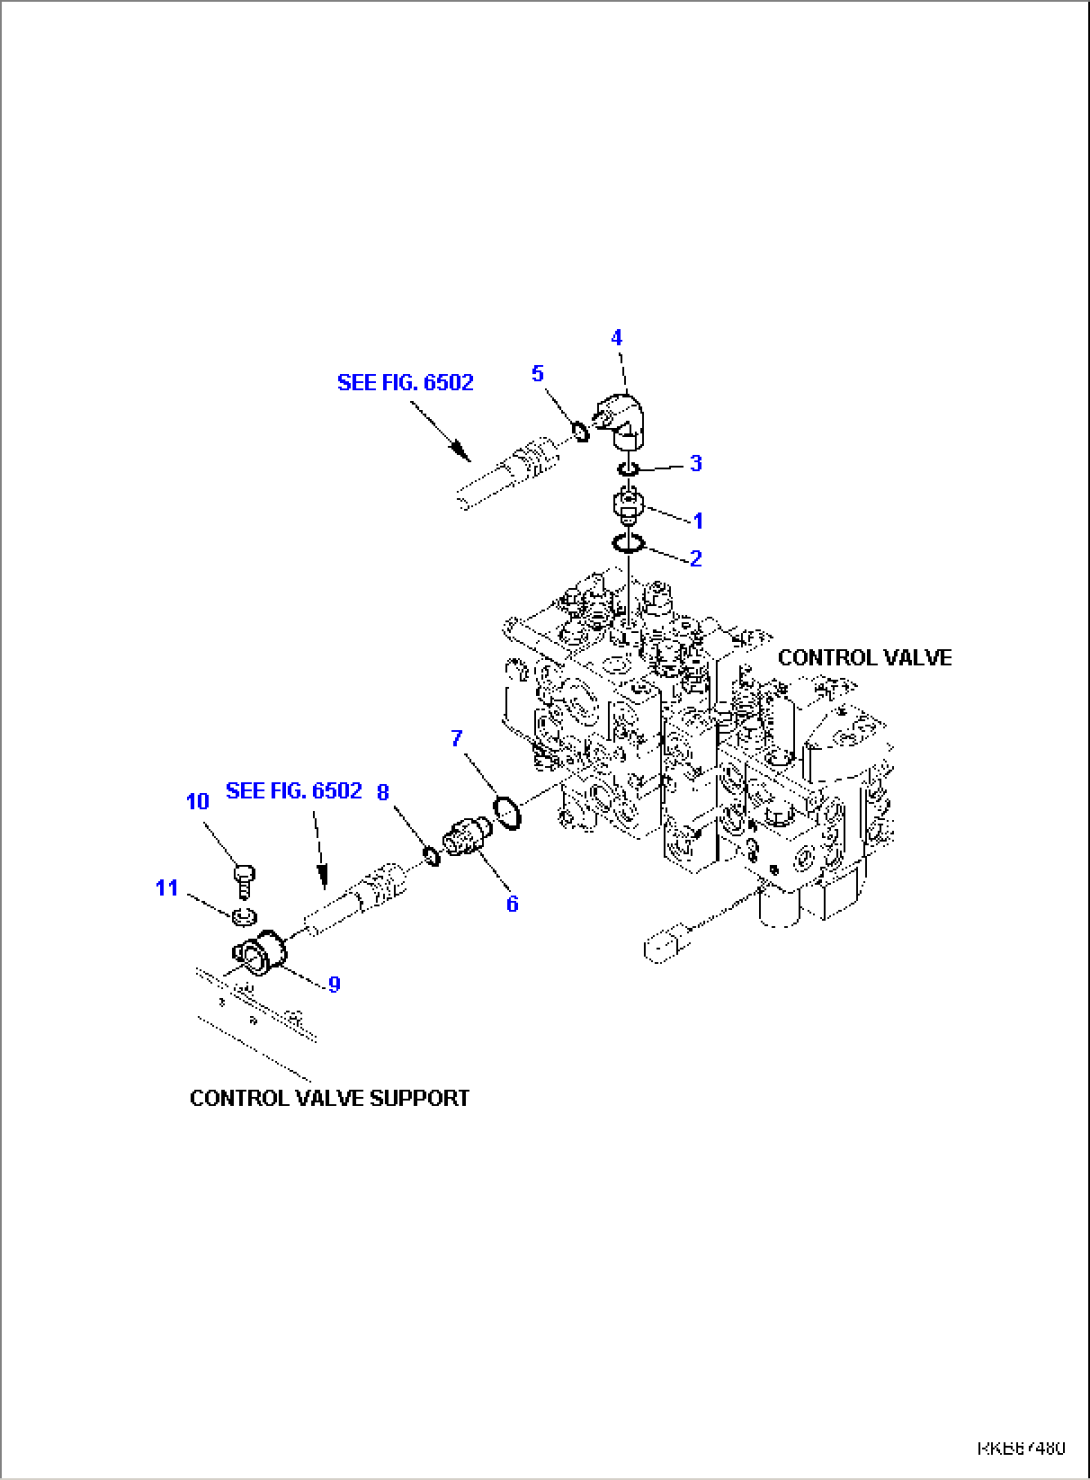 HYDRAULIC PIPING (STEERING LINE) (1/3)